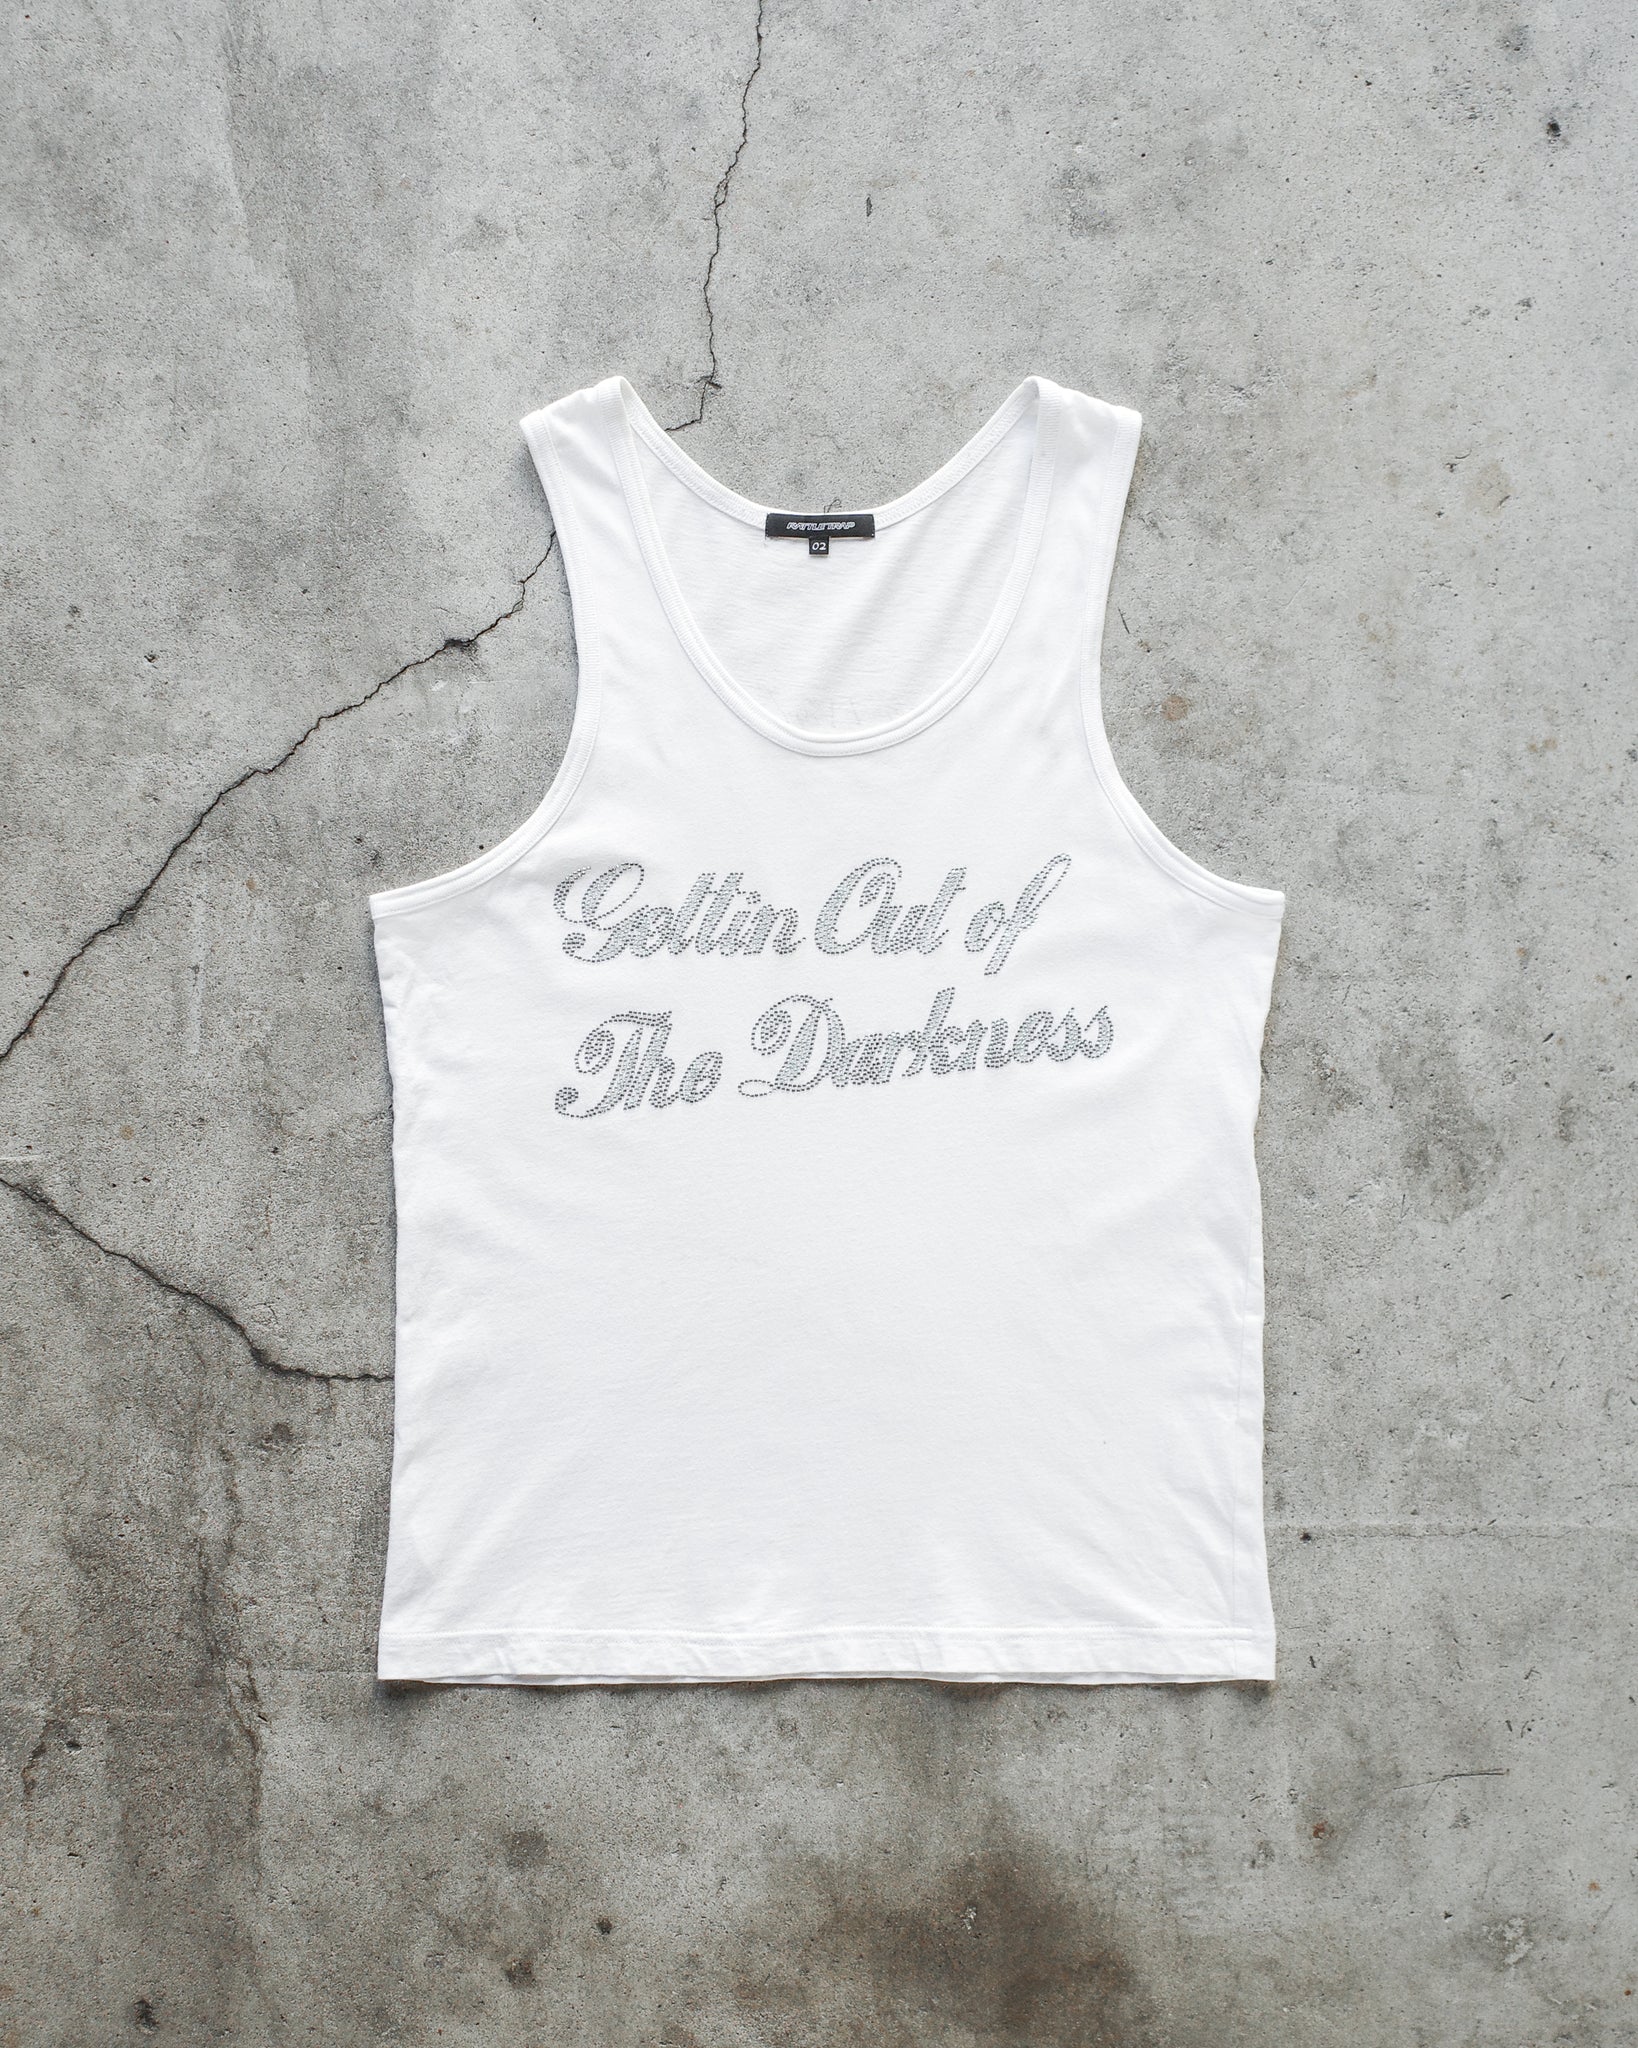 Rattle Trap "gettin out of the darkness" Tank